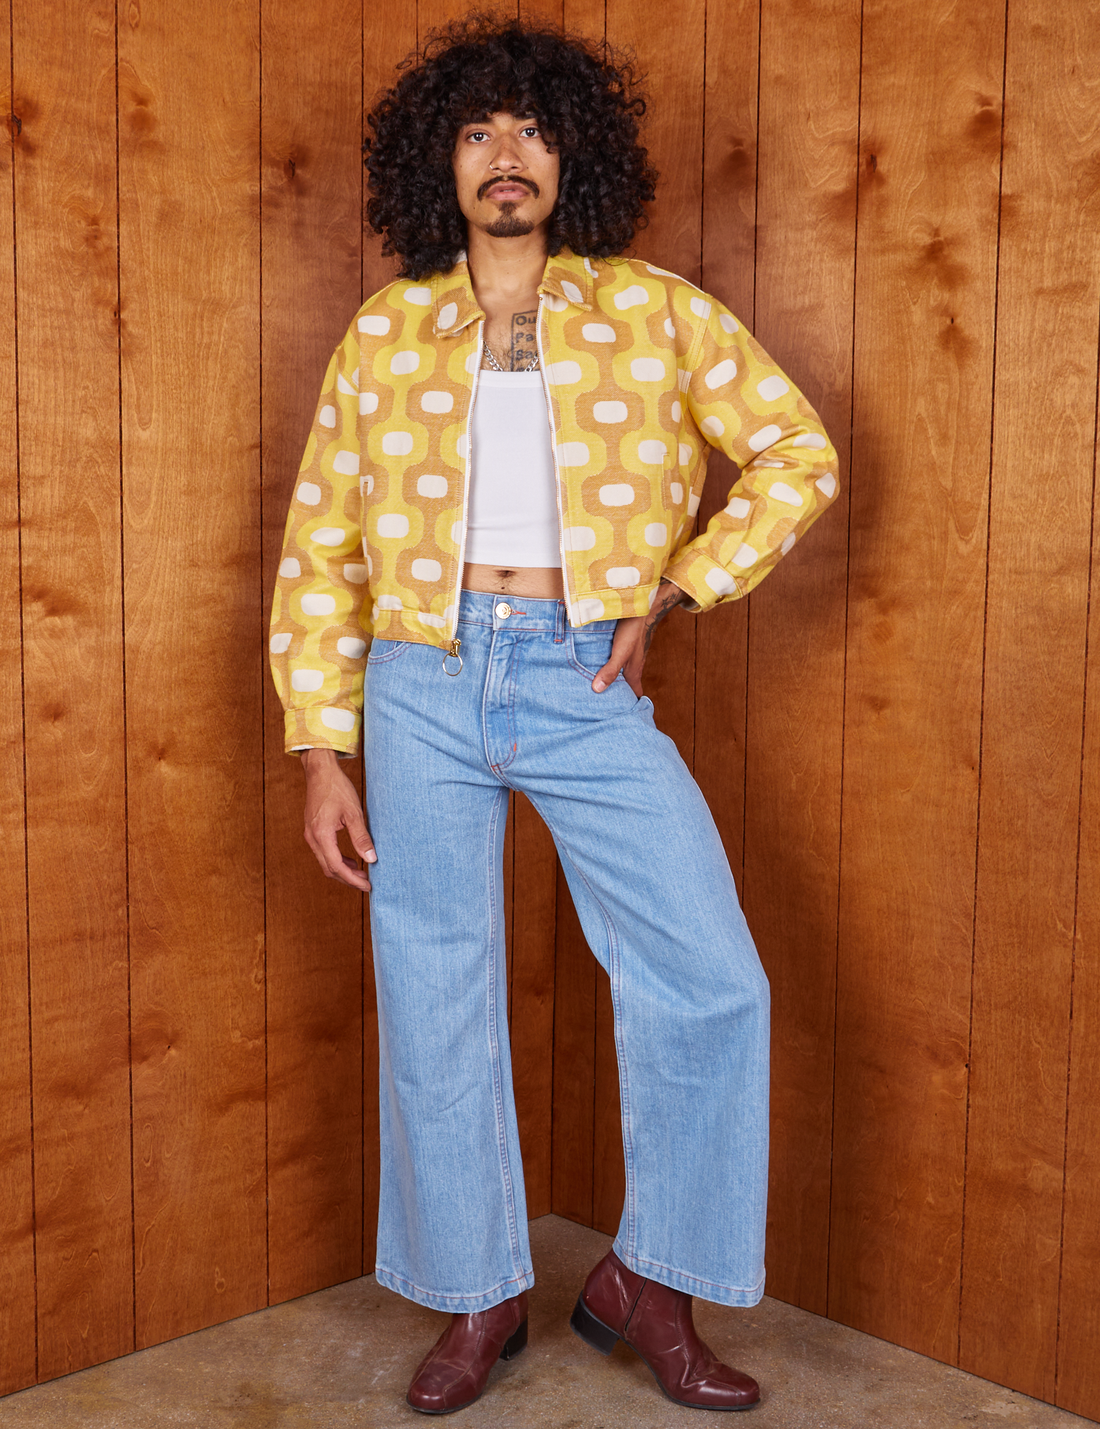 Jesse is 5'8" and wearing XS Jacquard Ricky Jacket in Yellow